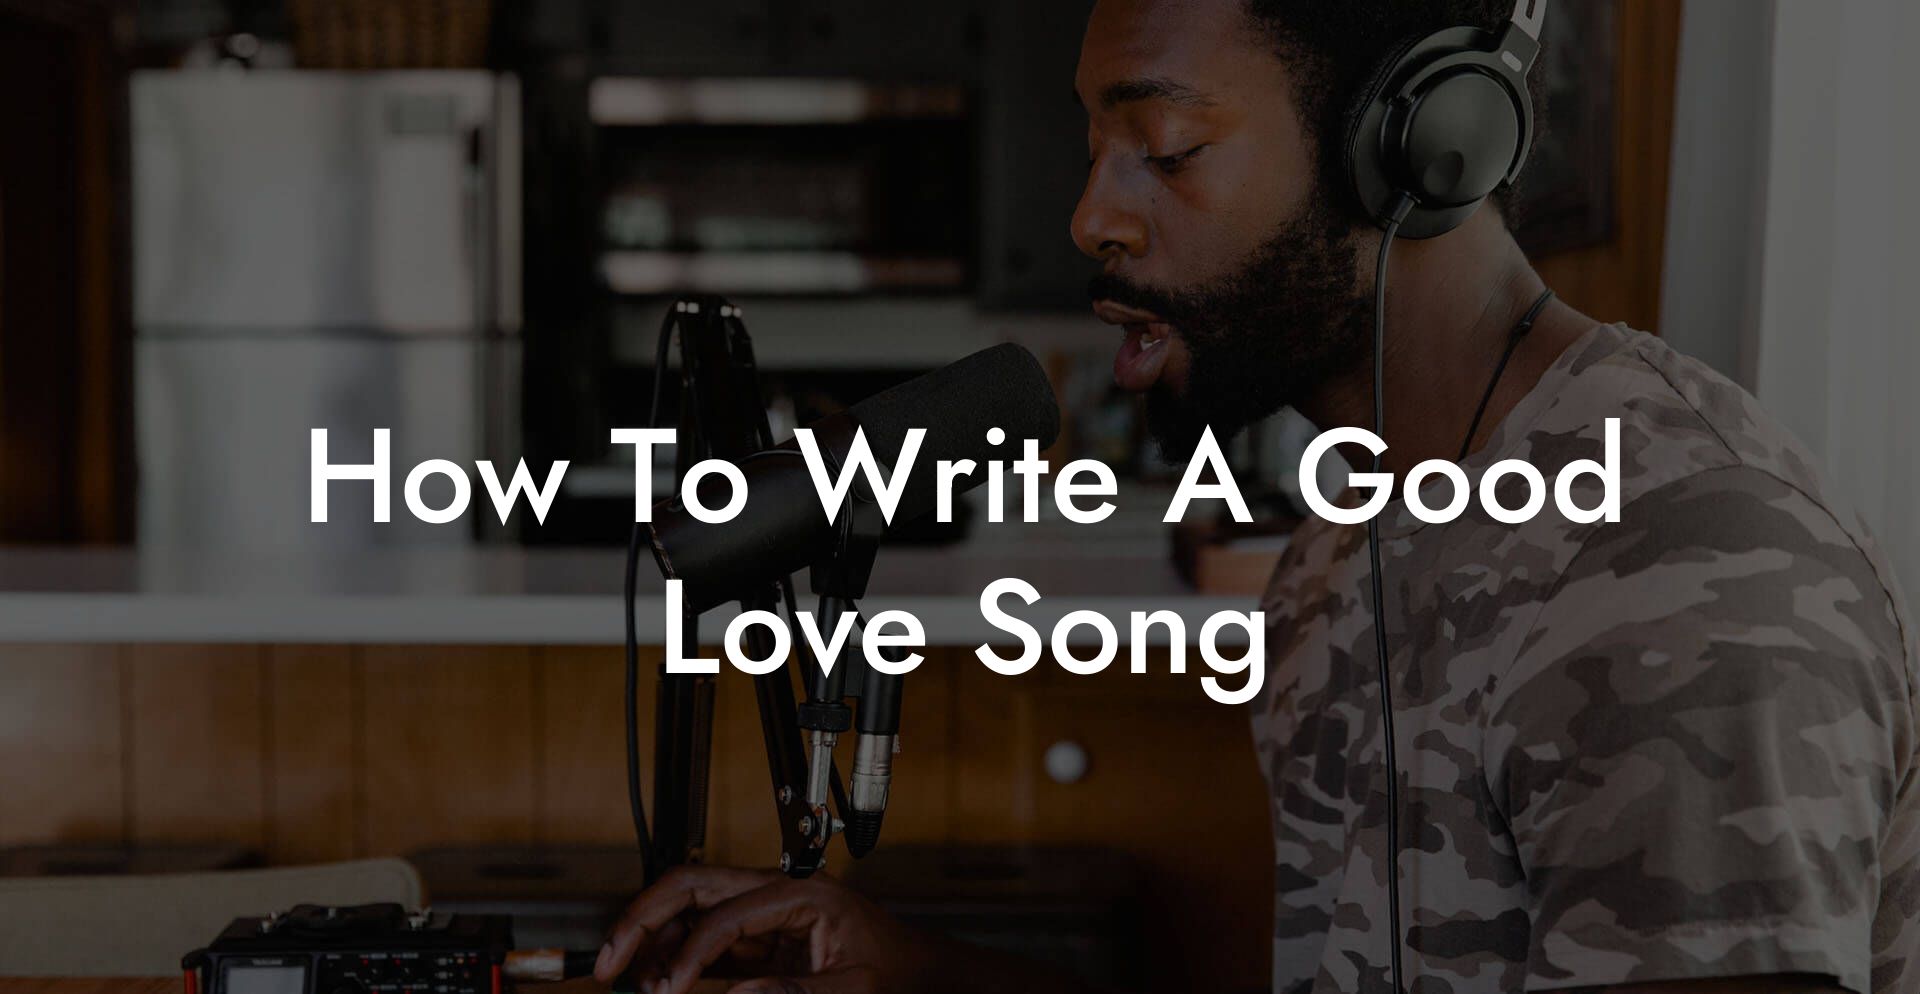 how to write a good love song lyric assistant